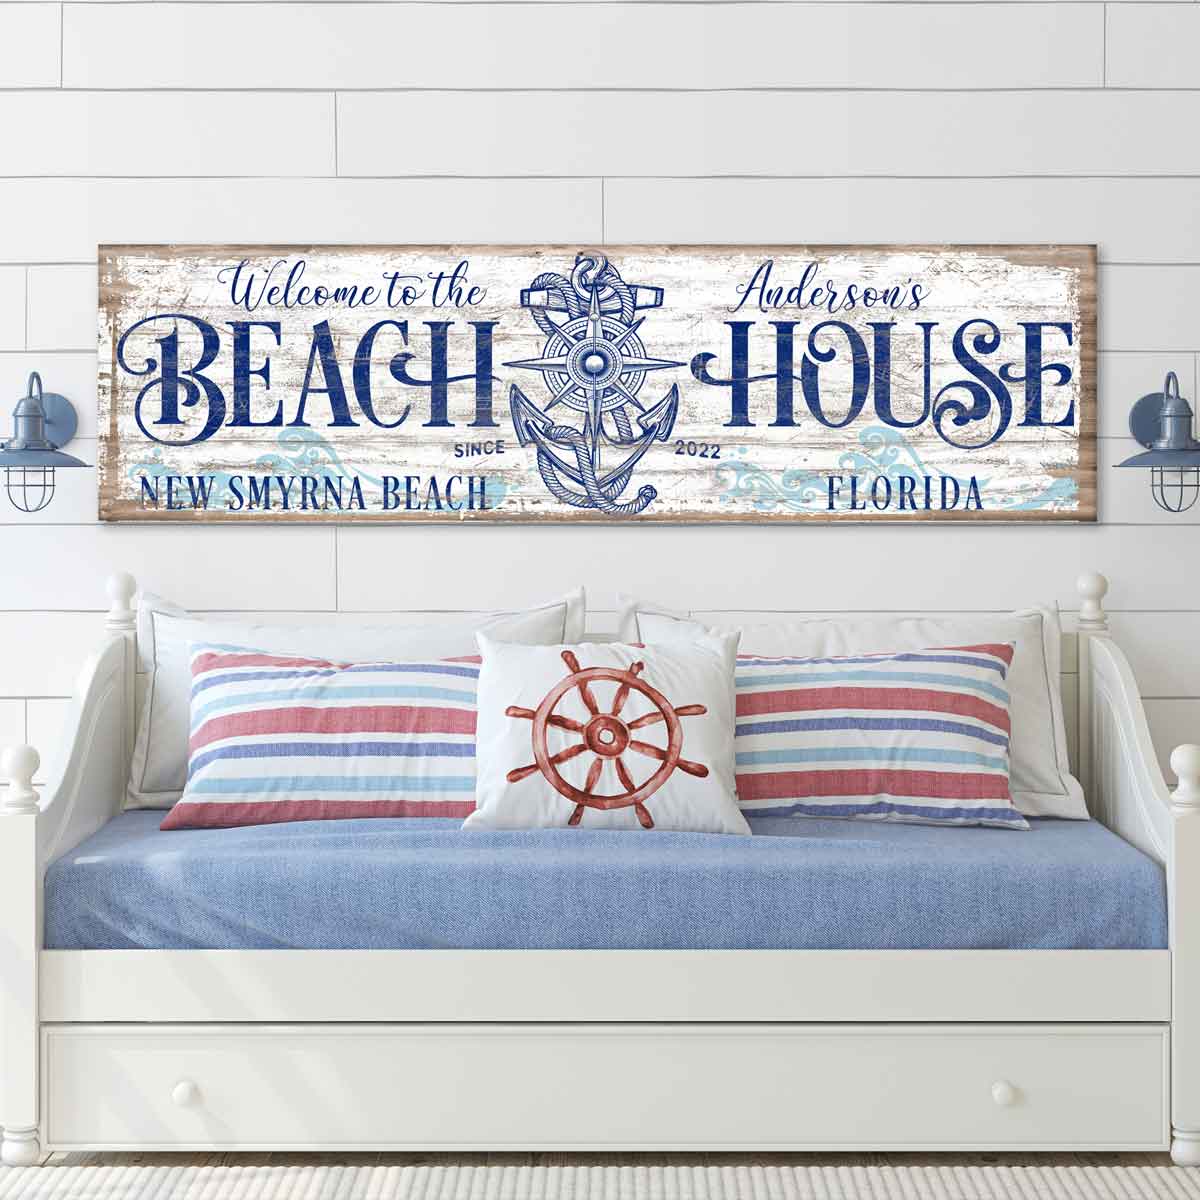 Coastal Decor -Anchor beach house sign with distressed white paint on faux distressed wood canvas frame with words {welcome to our beach house] est. date and name and state